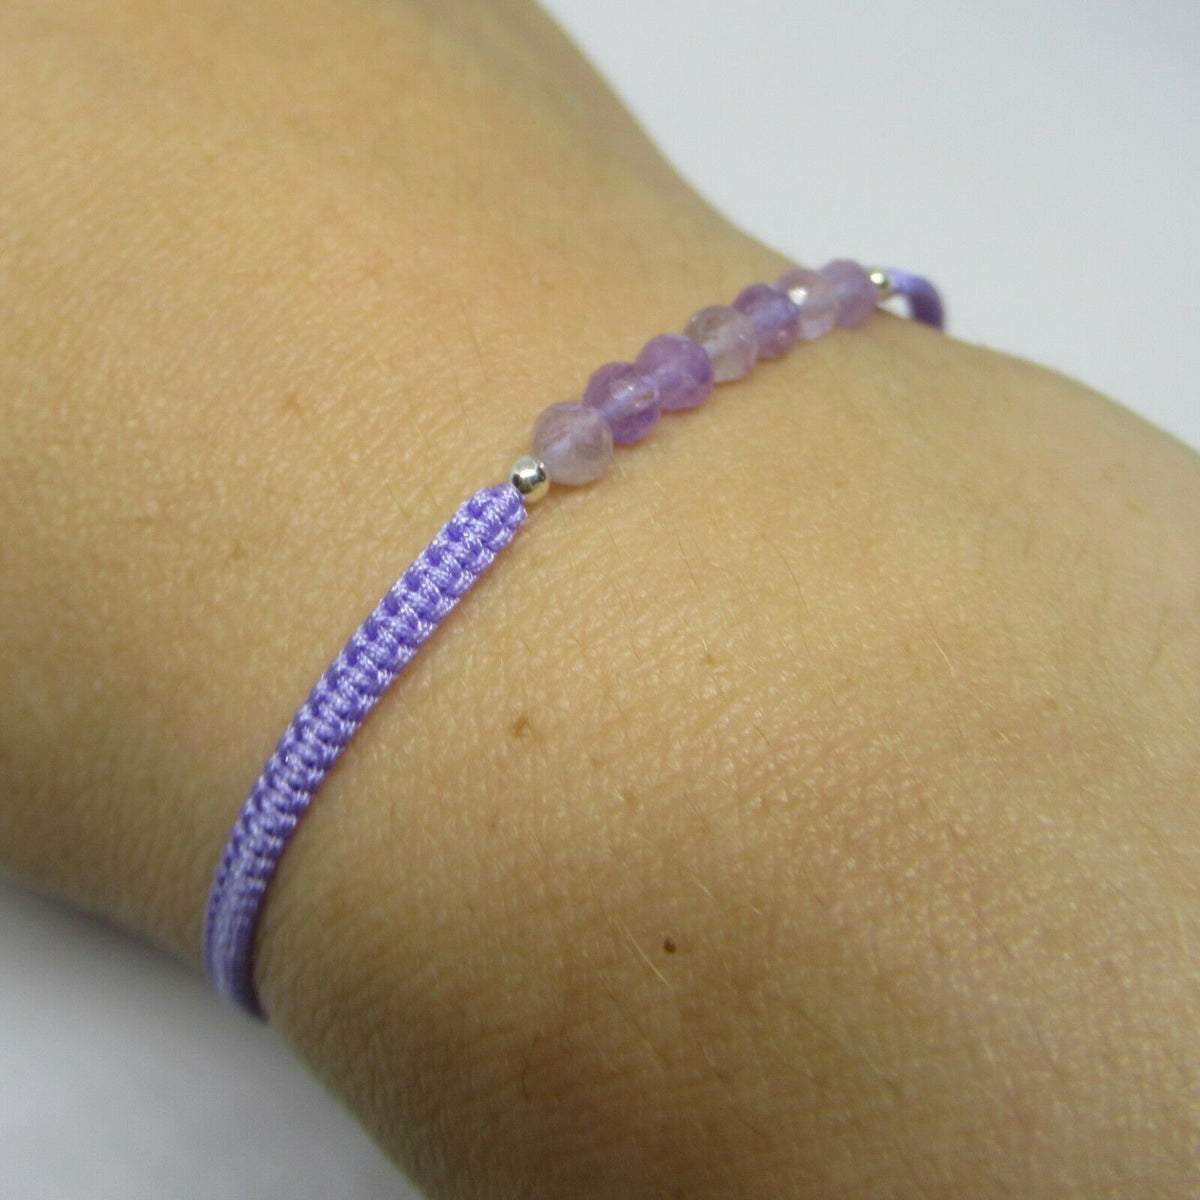 Details about   Purple Cord Friendship Bracelet With Amethyst Gemstone & 925 Sterling Beads